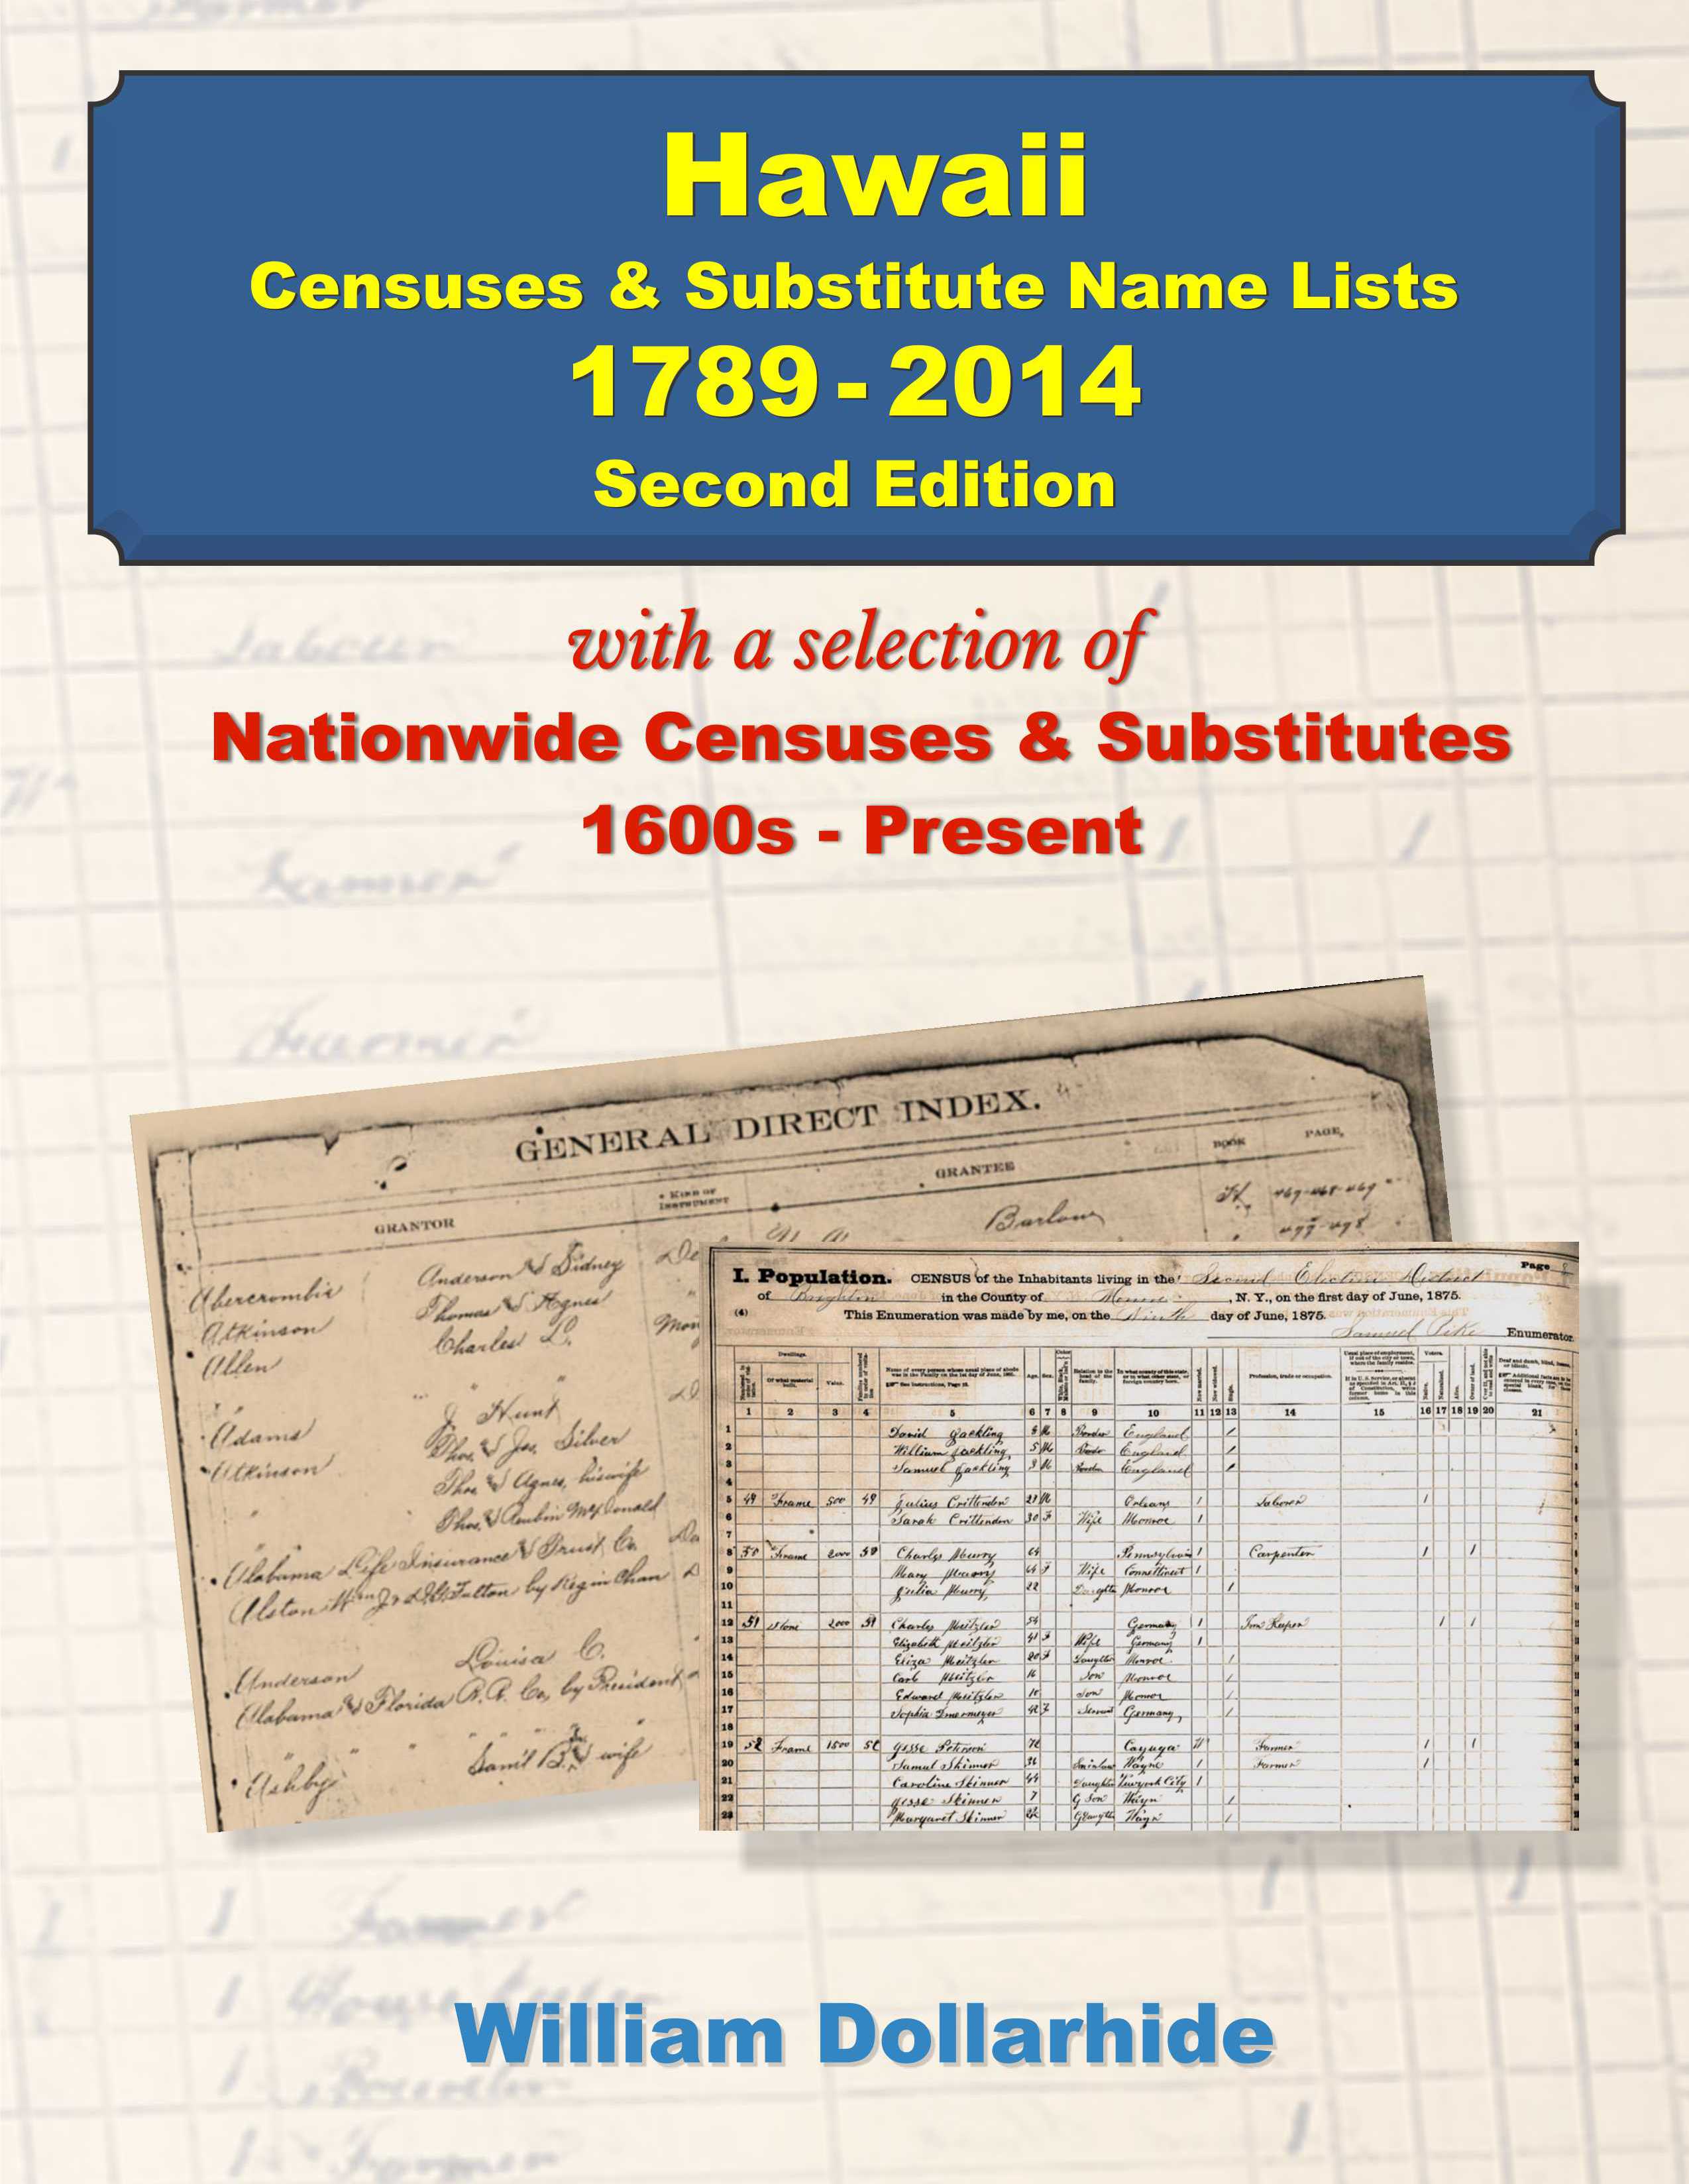 Hawaii Censuses & Substitute Name Lists, 1789-2014 – Second Edition - PDF eBook